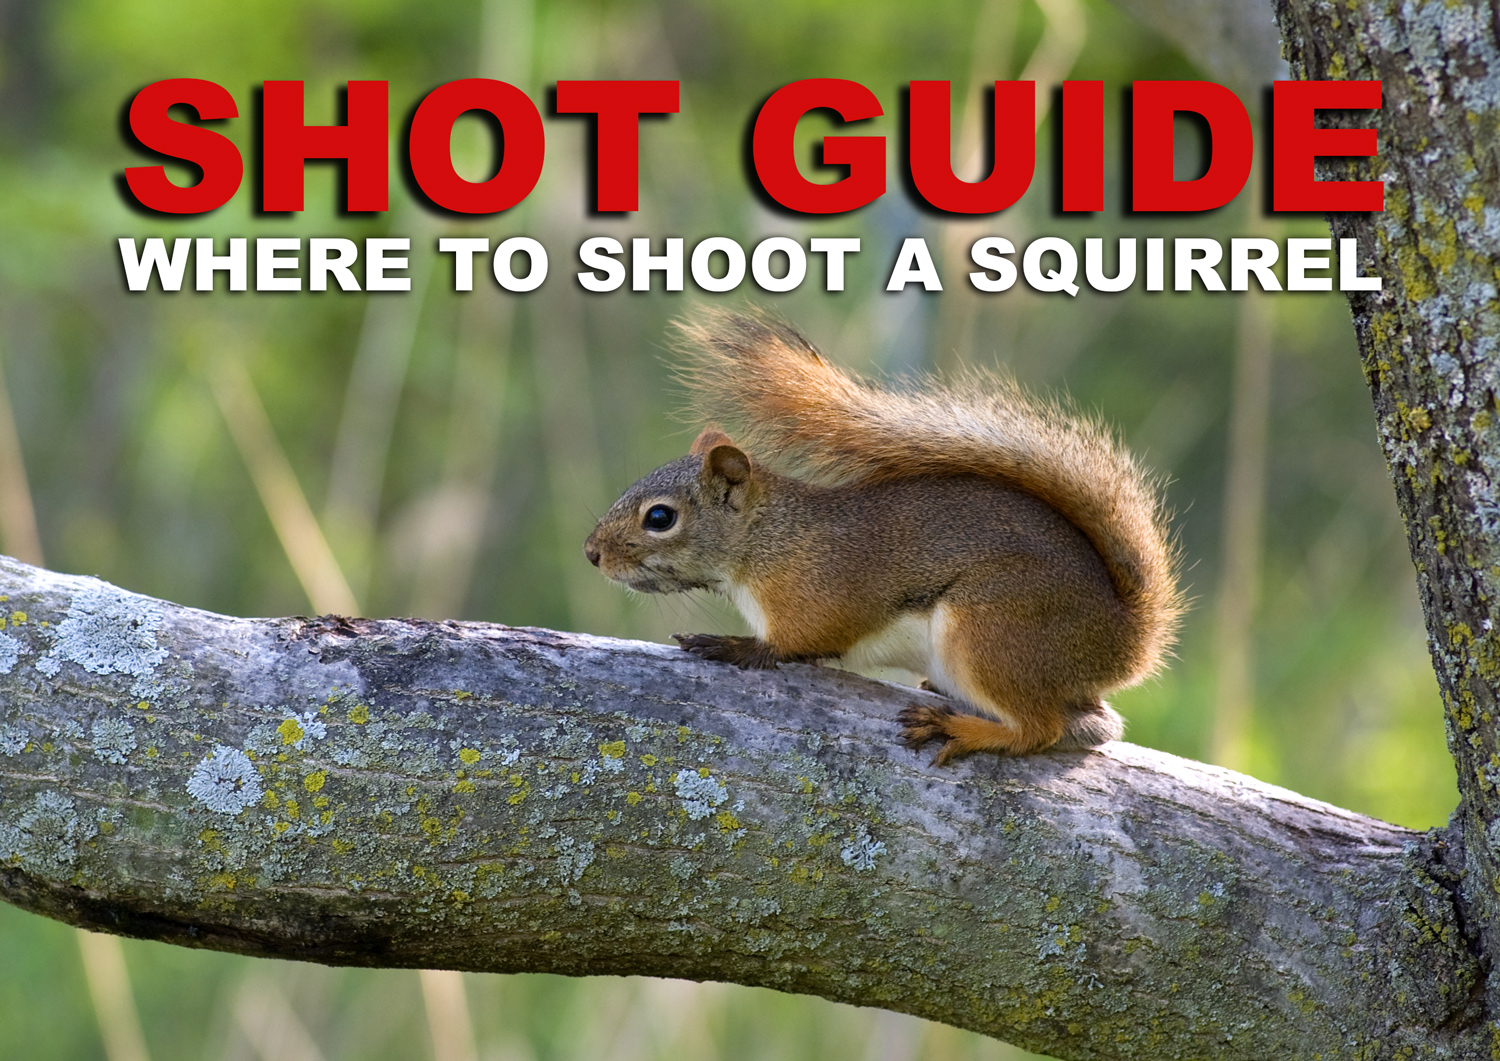 Where to shoot a squirrel when hunting